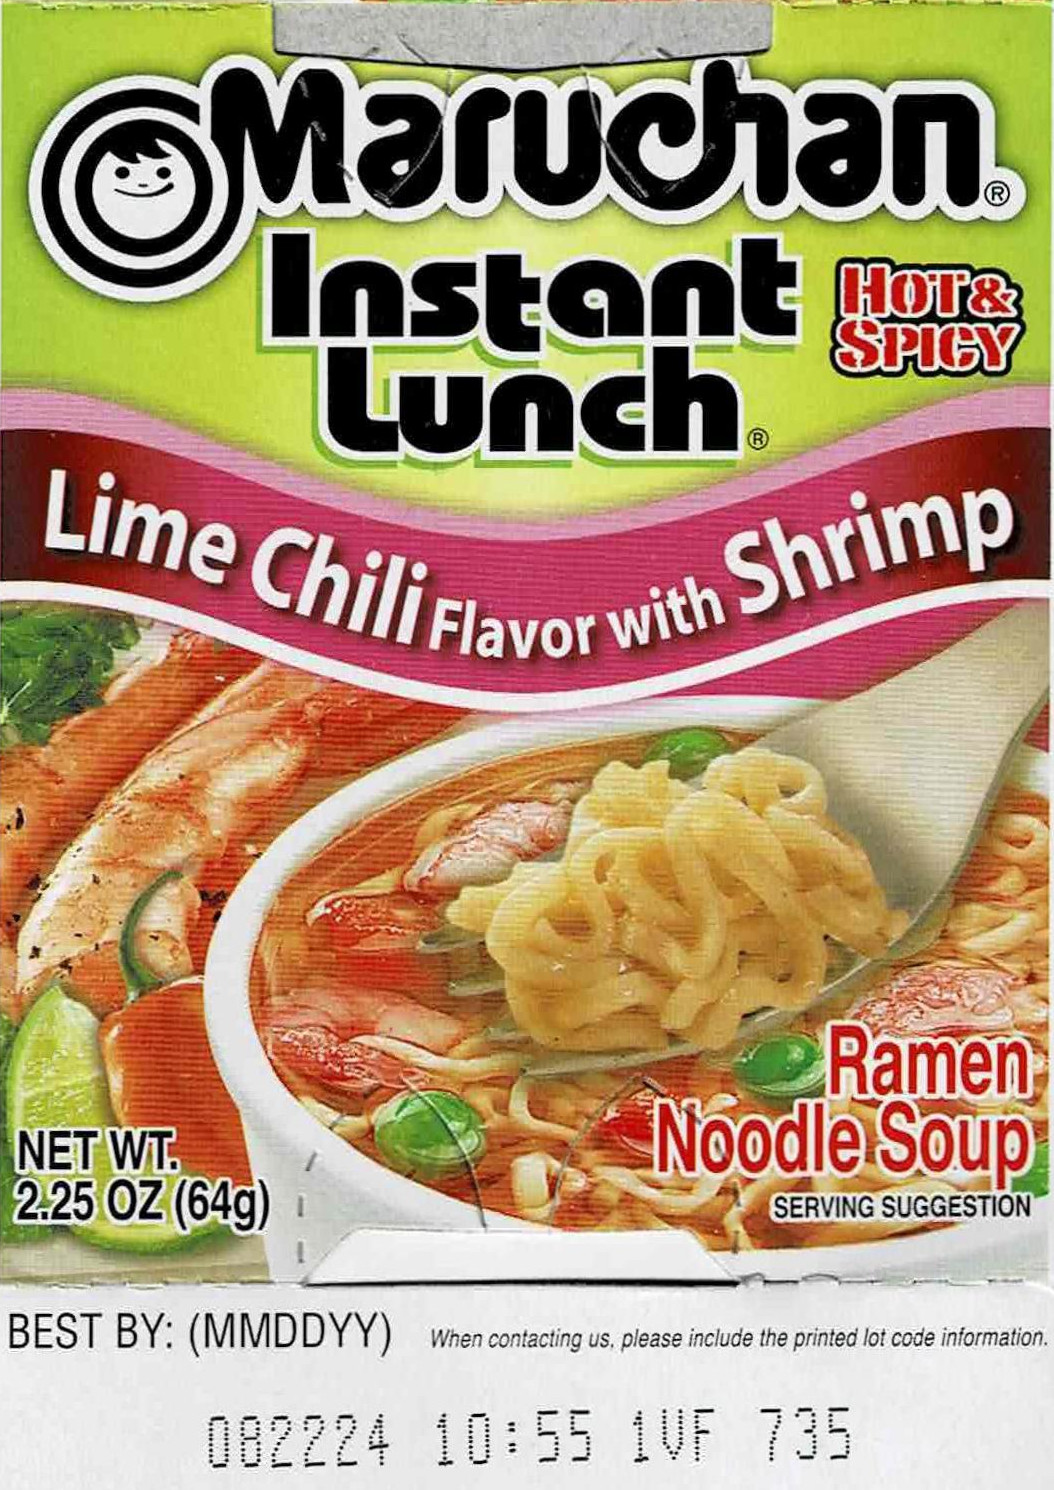 The front of the package of Maruchan Instant Lunch Lime Chilie with Shrimp.